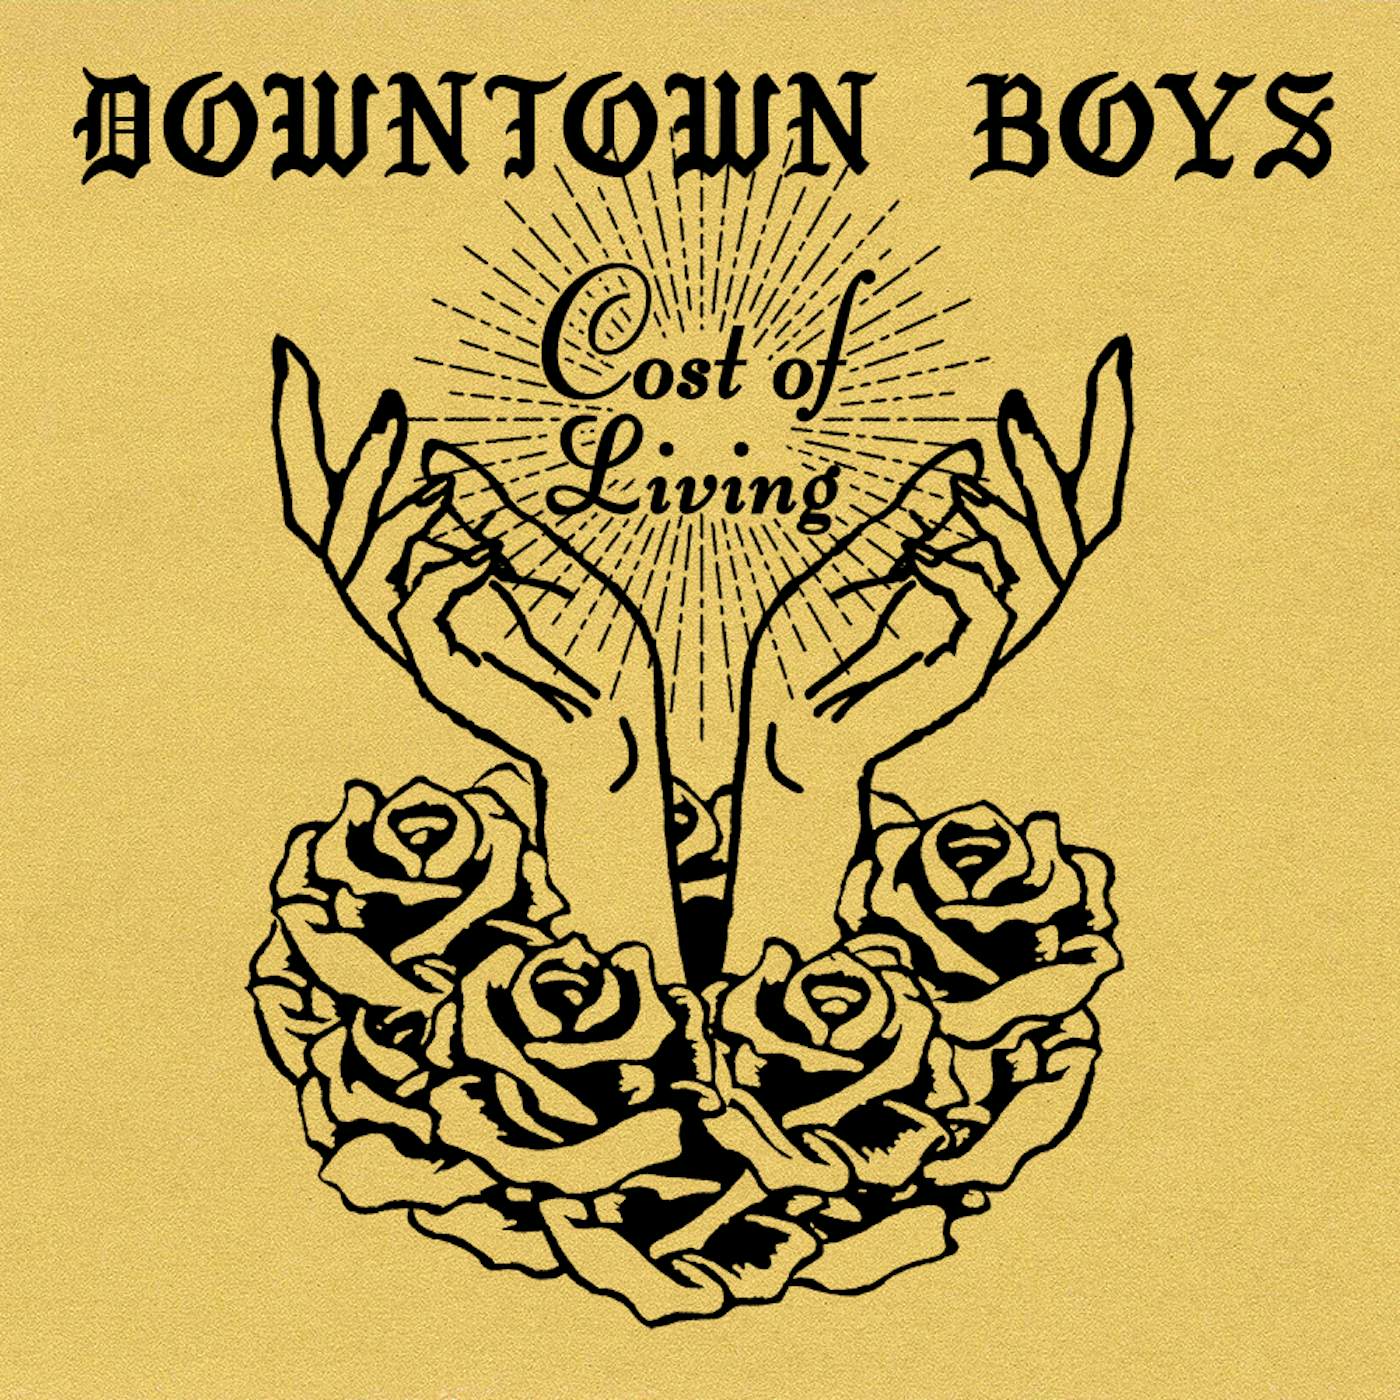 Downtown Boys Cost of Living Vinyl Record